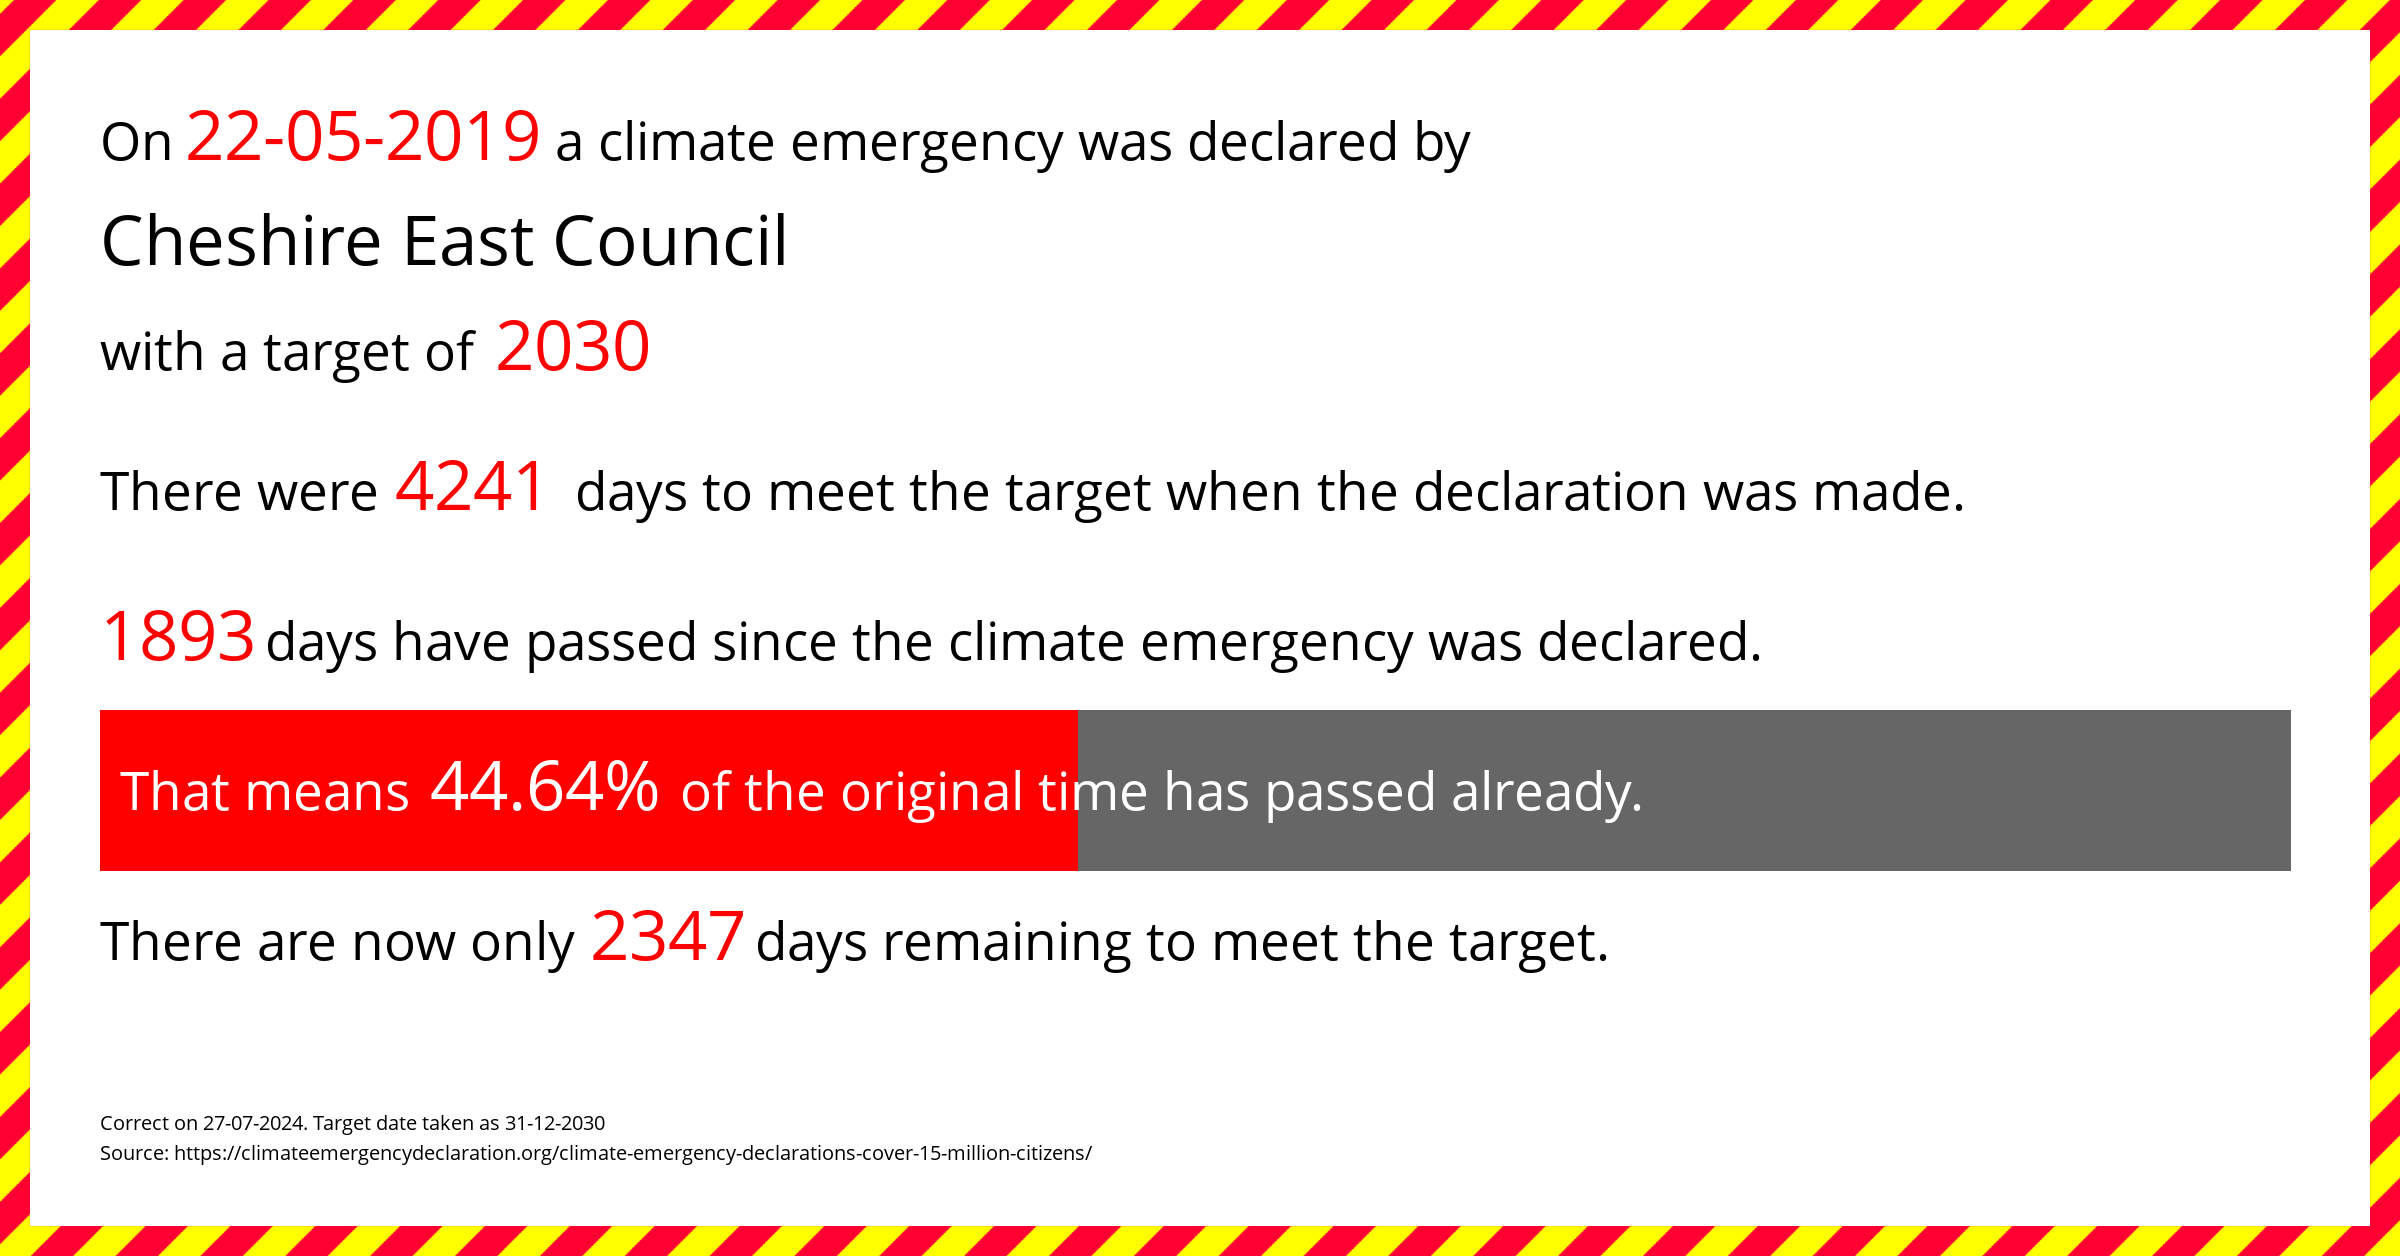 Cheshire East Council  declared a Climate emergency on Wednesday 22nd May 2019, with a target of 2030.